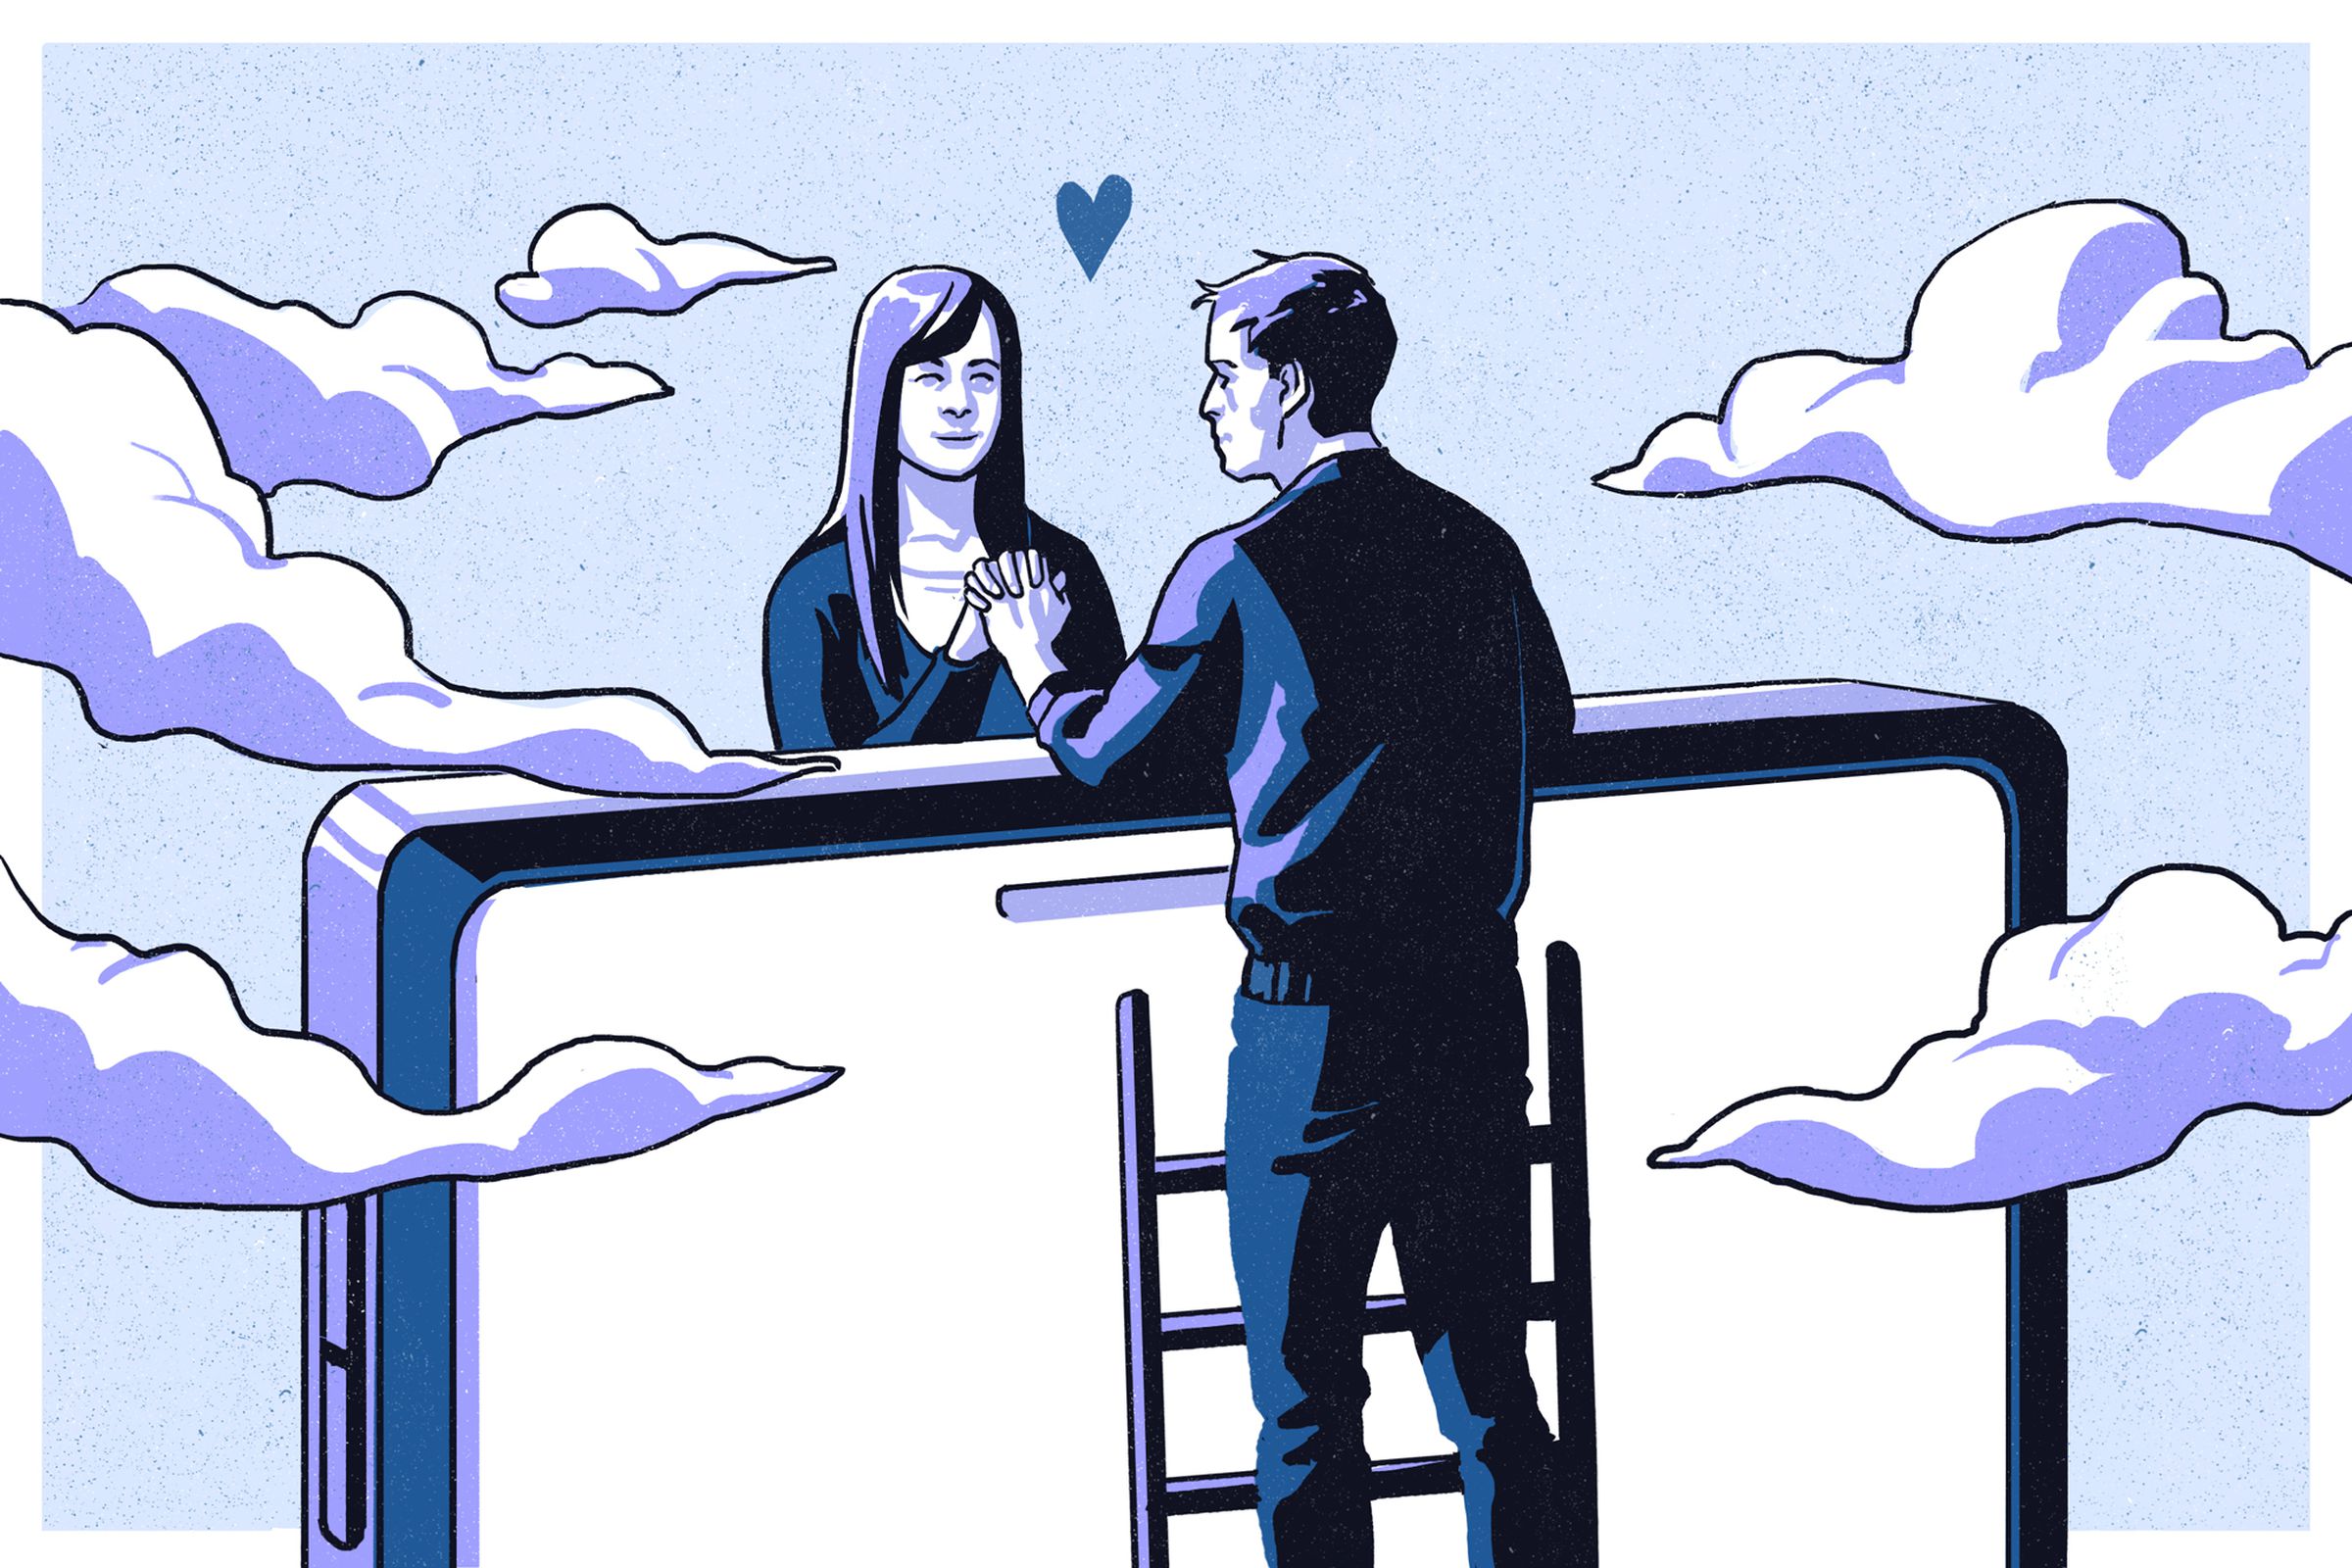 An illustration of two people meeting each other around a giant phone.